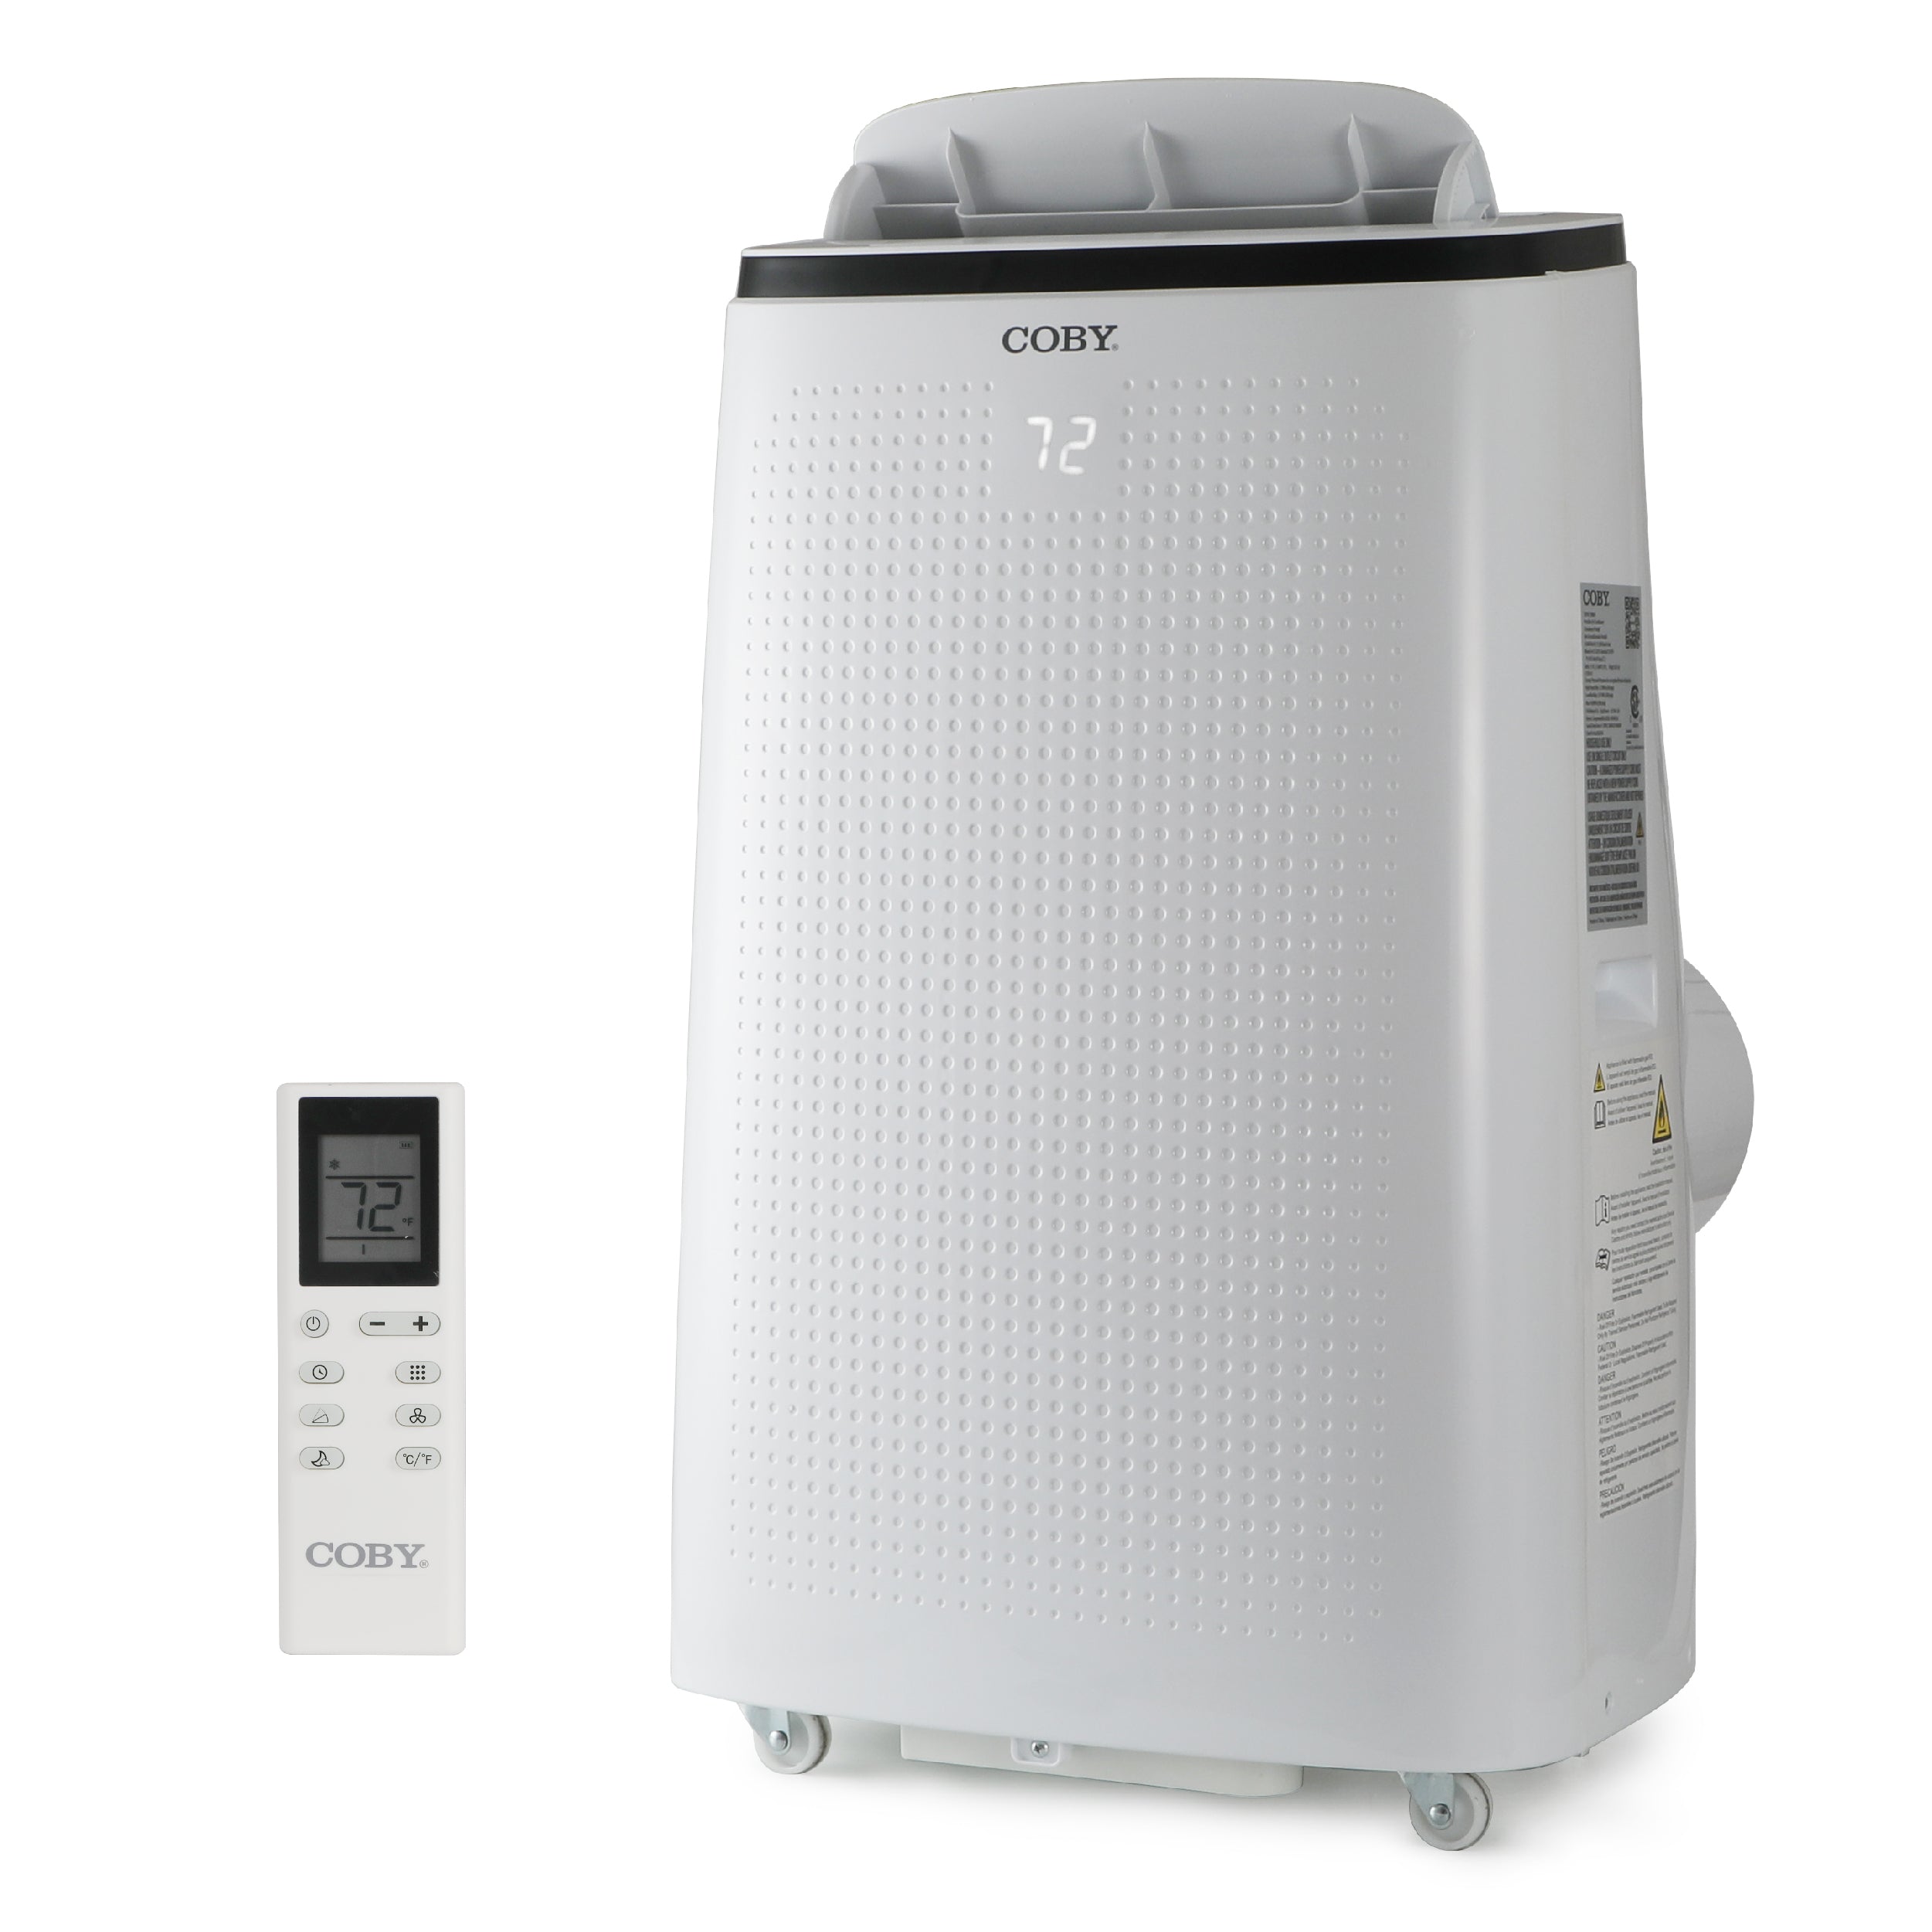 COBY Portable Air Conditioner 3-in-1 AC Unit, Dehumidifier & Fan, Air Conditioner 15,000 BTU Portable AC Unit with Remote Control for Rooms up to 775 Sq. Ft., 24-Hour Timer, & Installation Kit